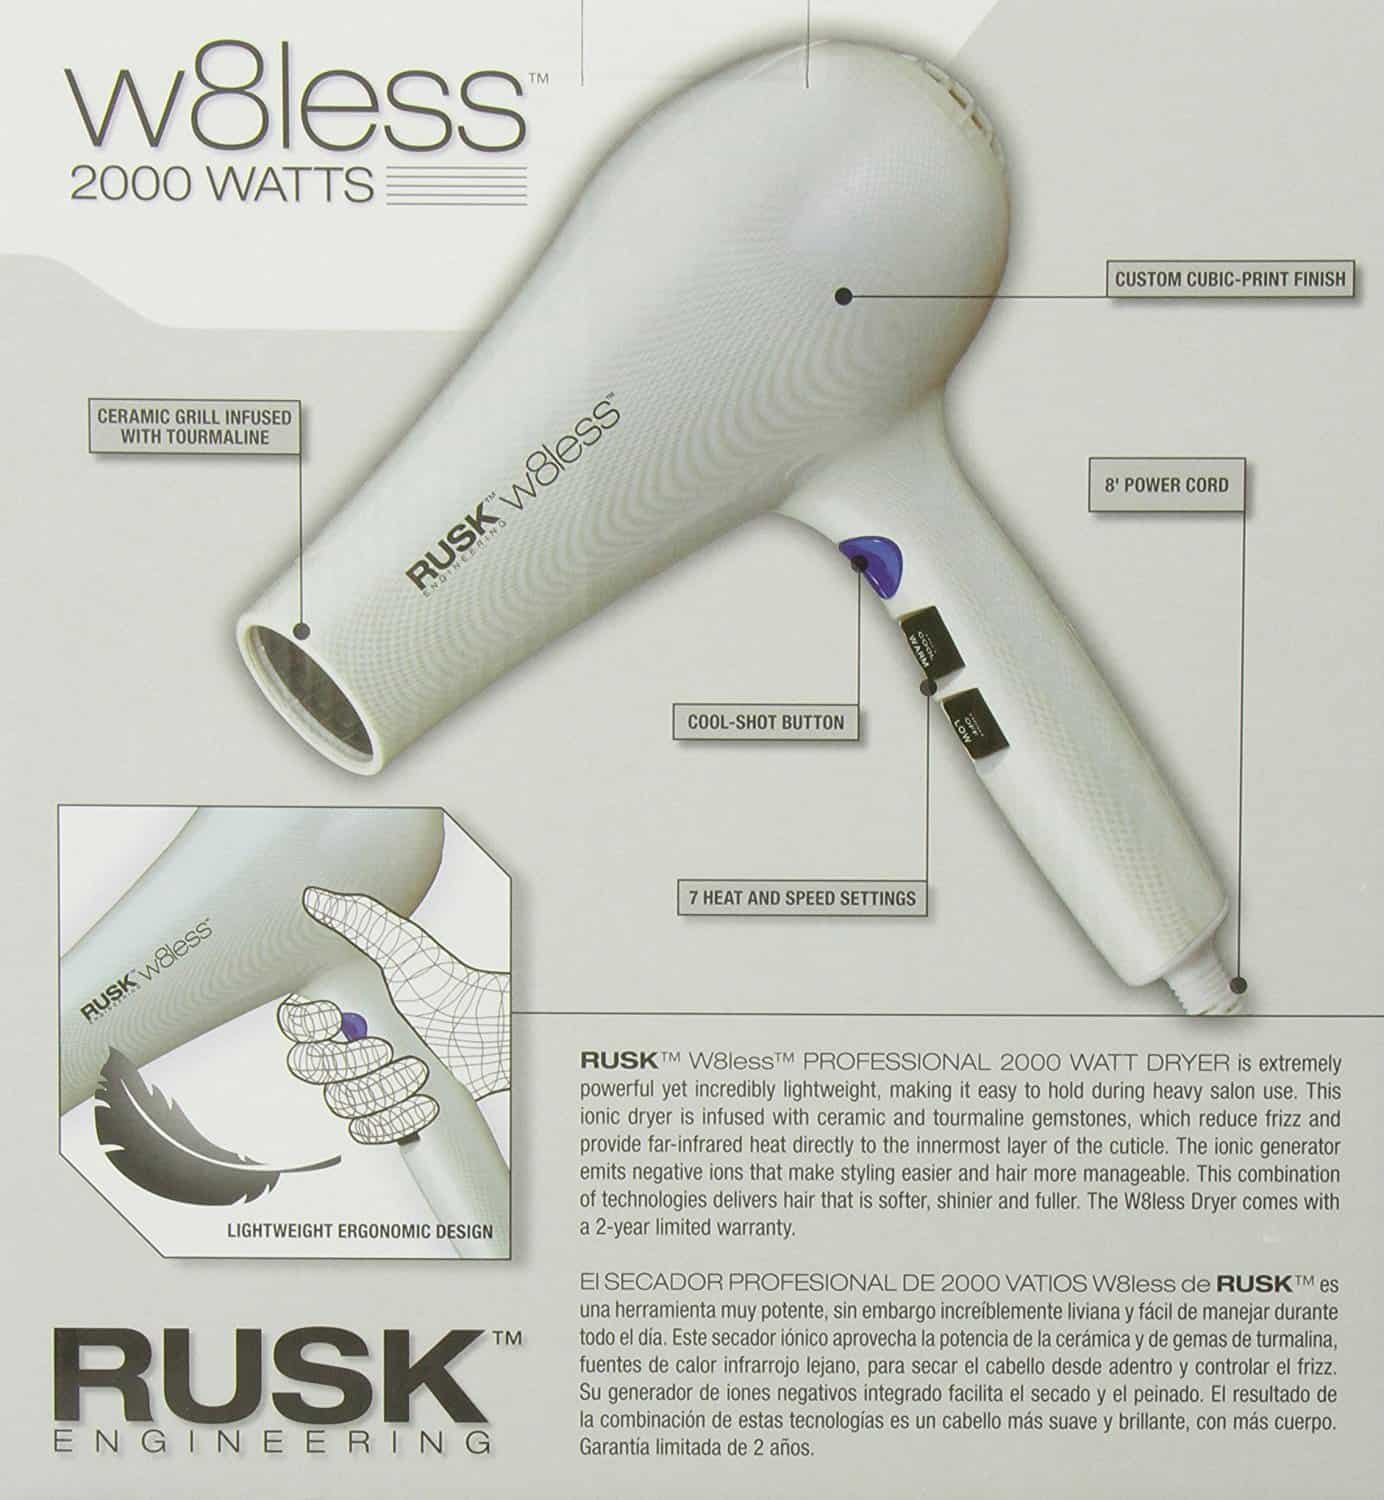 Information on the RUSK w8less blow dryer